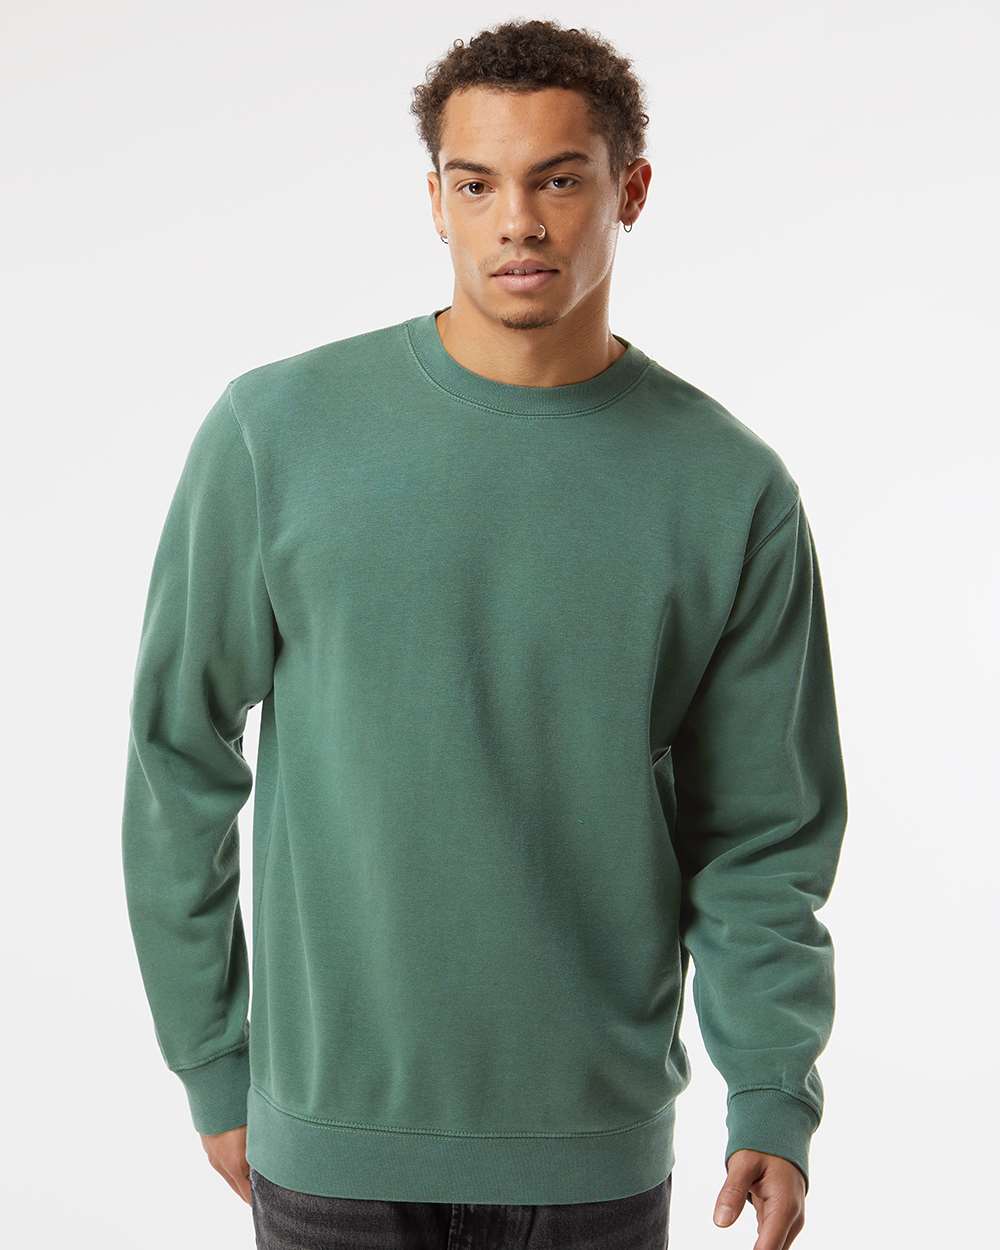 Independent Trading Co. - Unisex Midweight Pigment-Dyed Crewneck Sweatshirt - PRM3500